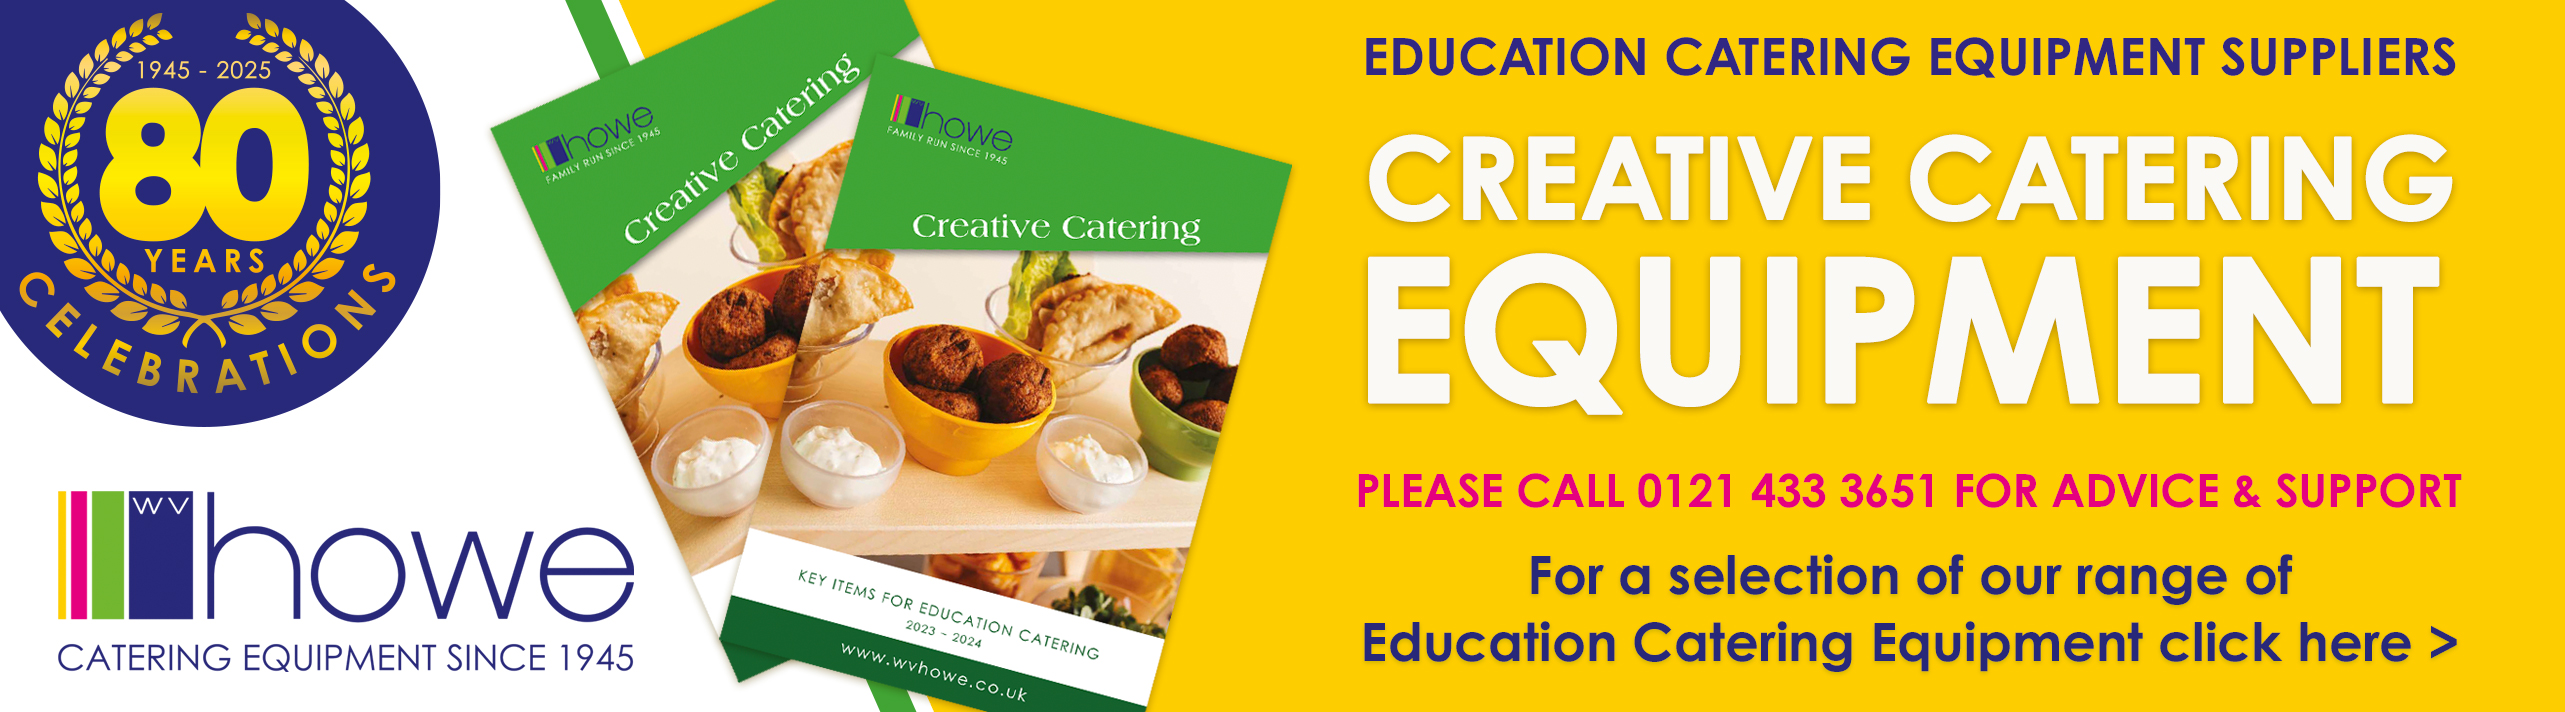 Education Catering Website Banner